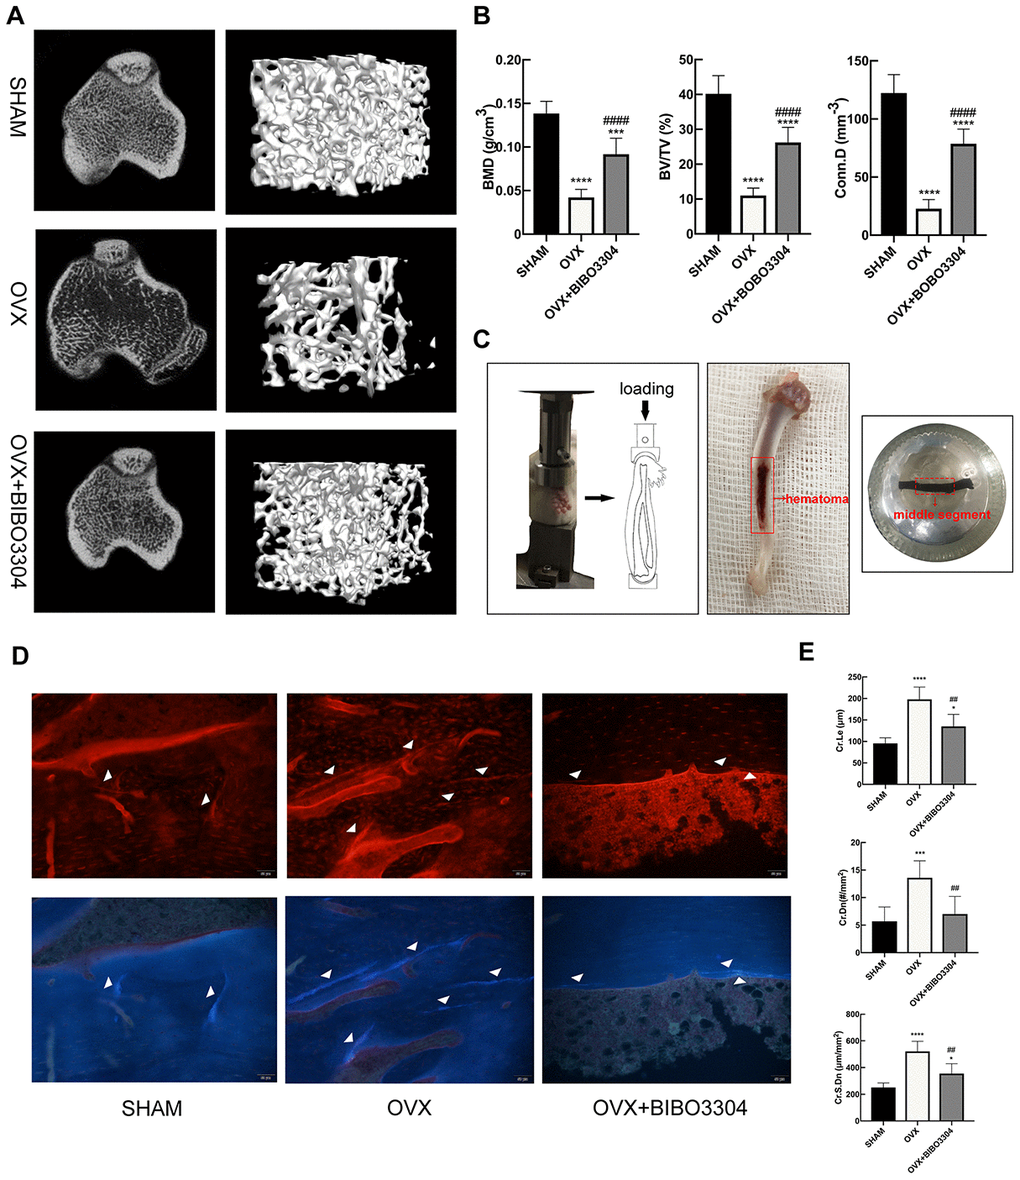 Y1R antagonist treatment improved bone microstructure and decrease microdamage in OVX rats. Representative micro-CT images of rat tibias (A) and quantitative analysis of bone microstructure (B). (C) In vivo fatigue loading model and the position of the sample for microdamage analysis in the rat tibia. Fluorescent images (D) and comparison (E) of microdamage (white arrow head) among groups (x 200). The data are expressed as the means ± SD (n = 6 in each group). *P##P####P